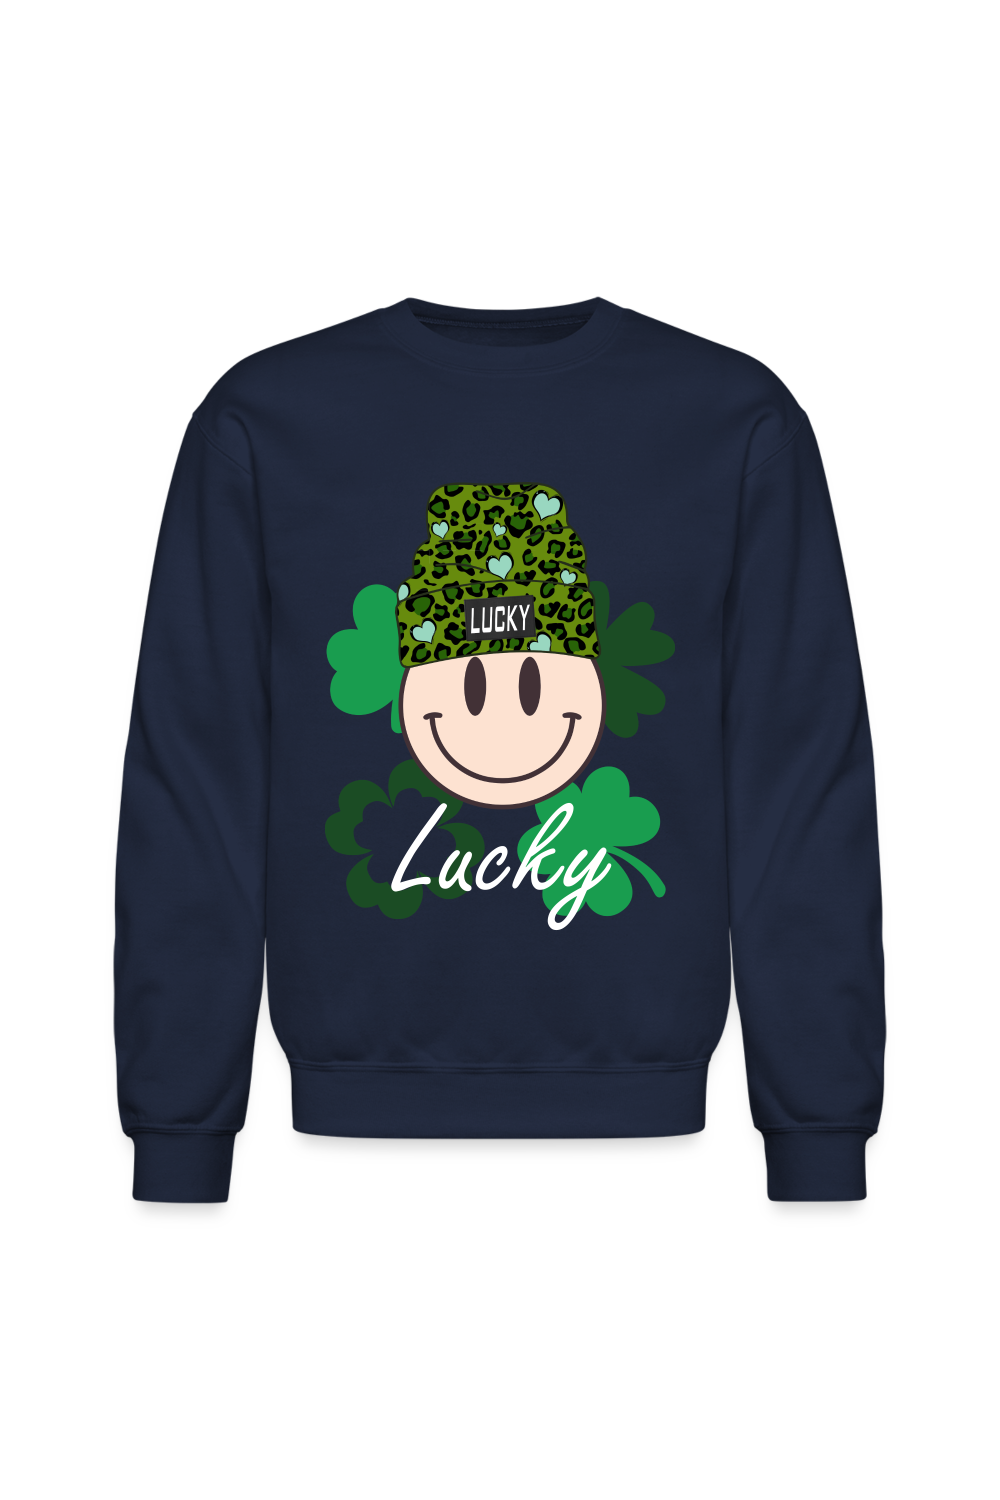 Women Lucky Smiley Face with Beanie Hat St. Patrick's Day Crewneck Long Sleeve Sweatshirt - navy - NicholesGifts.online